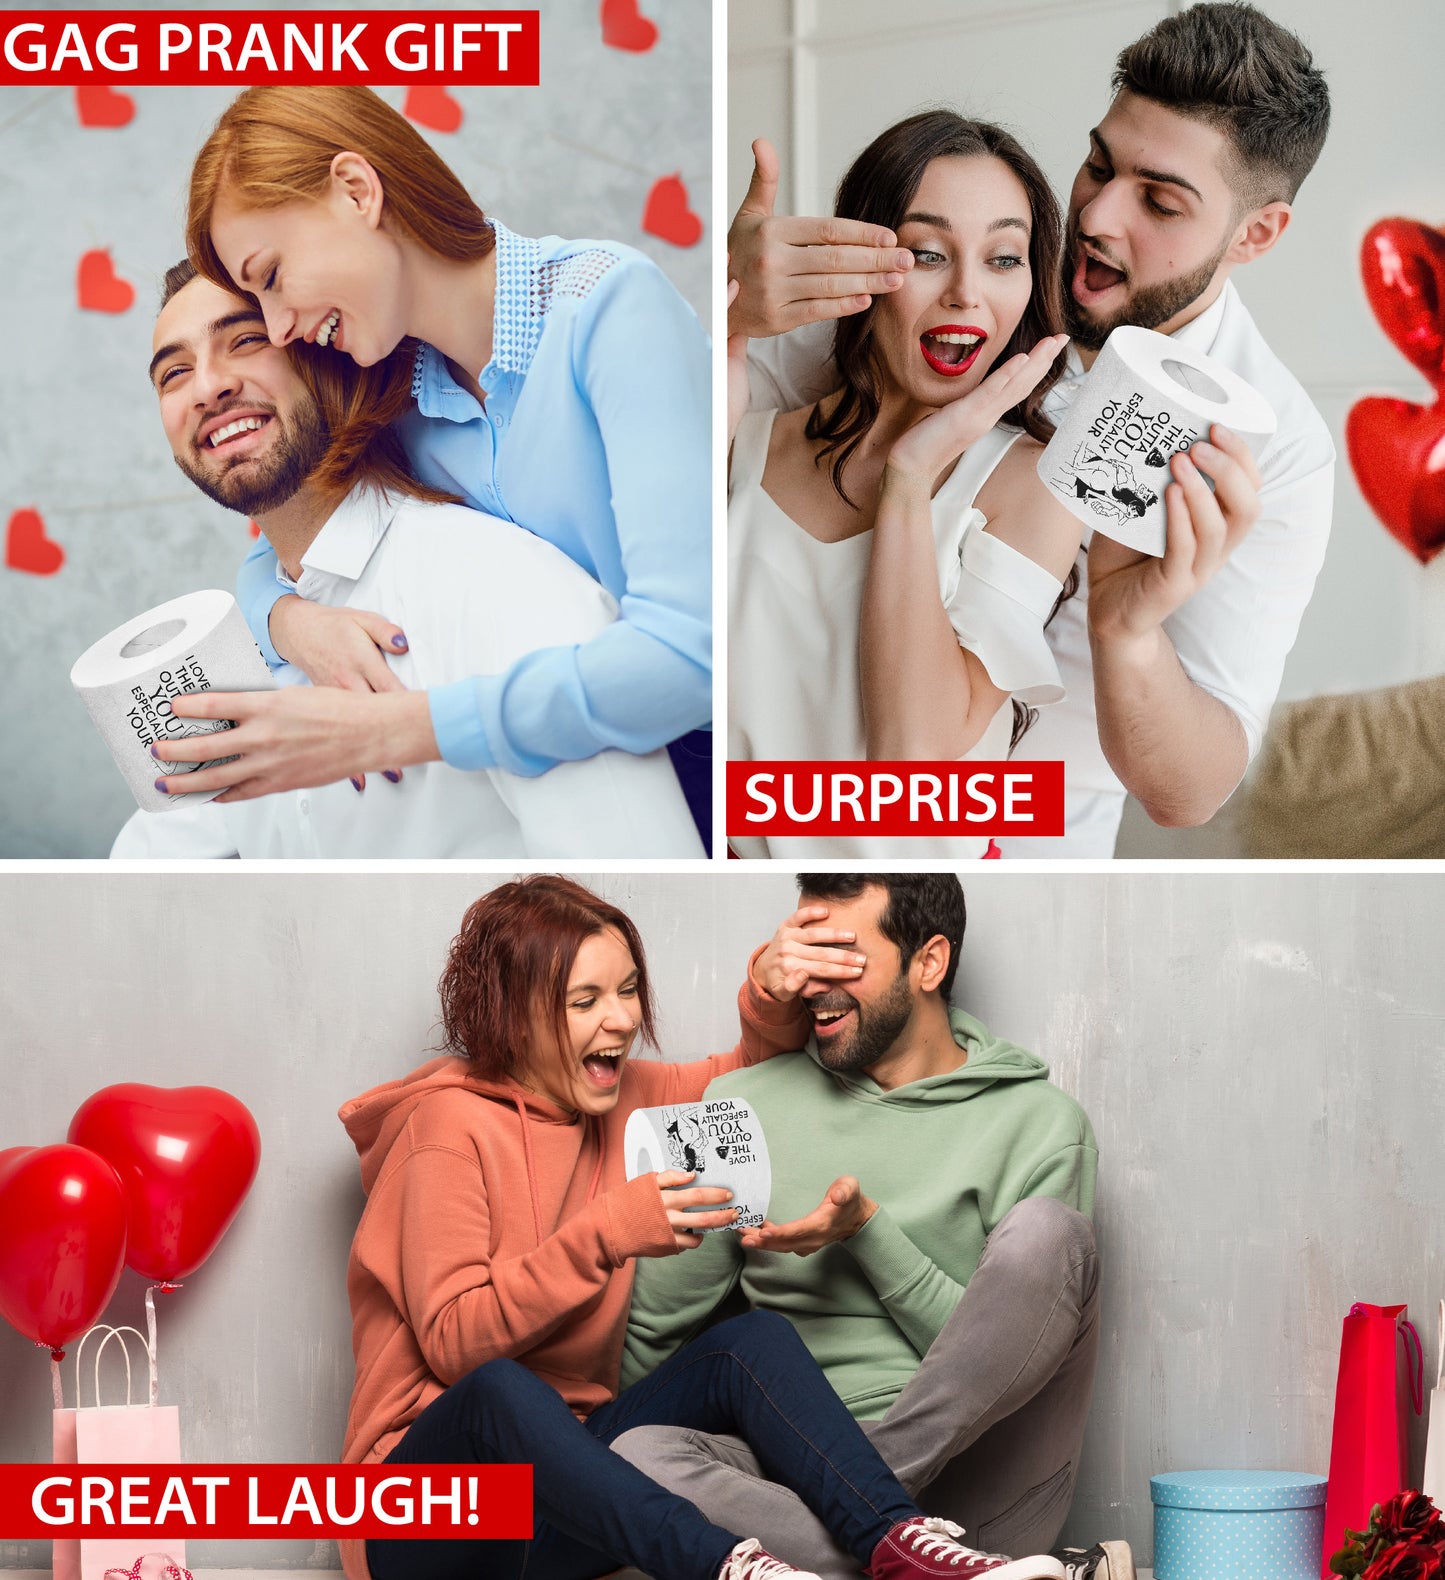 Printed TP Love Your Butt Printed Toilet Paper Gag Gift For Prank – 500 Sheets